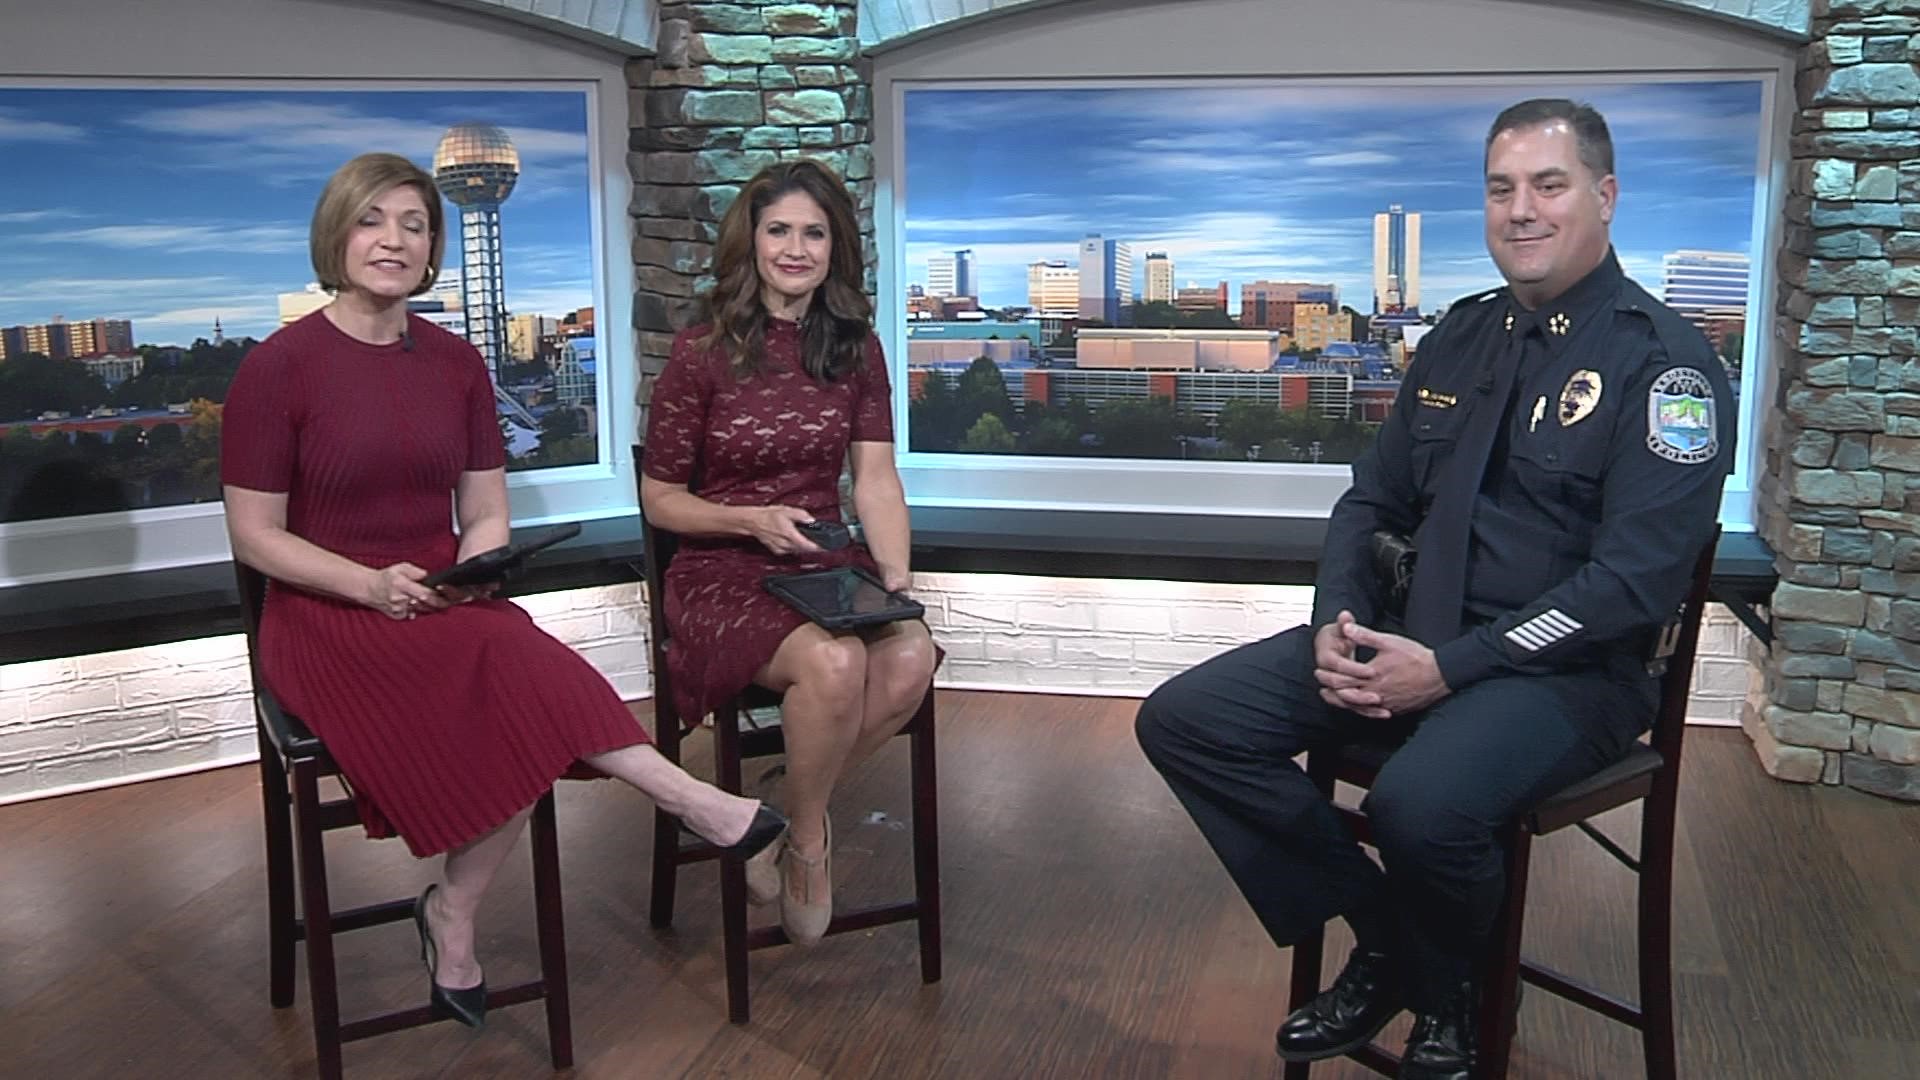 KPD Chief Paul Noel offers tips you can use to increase your personal security.